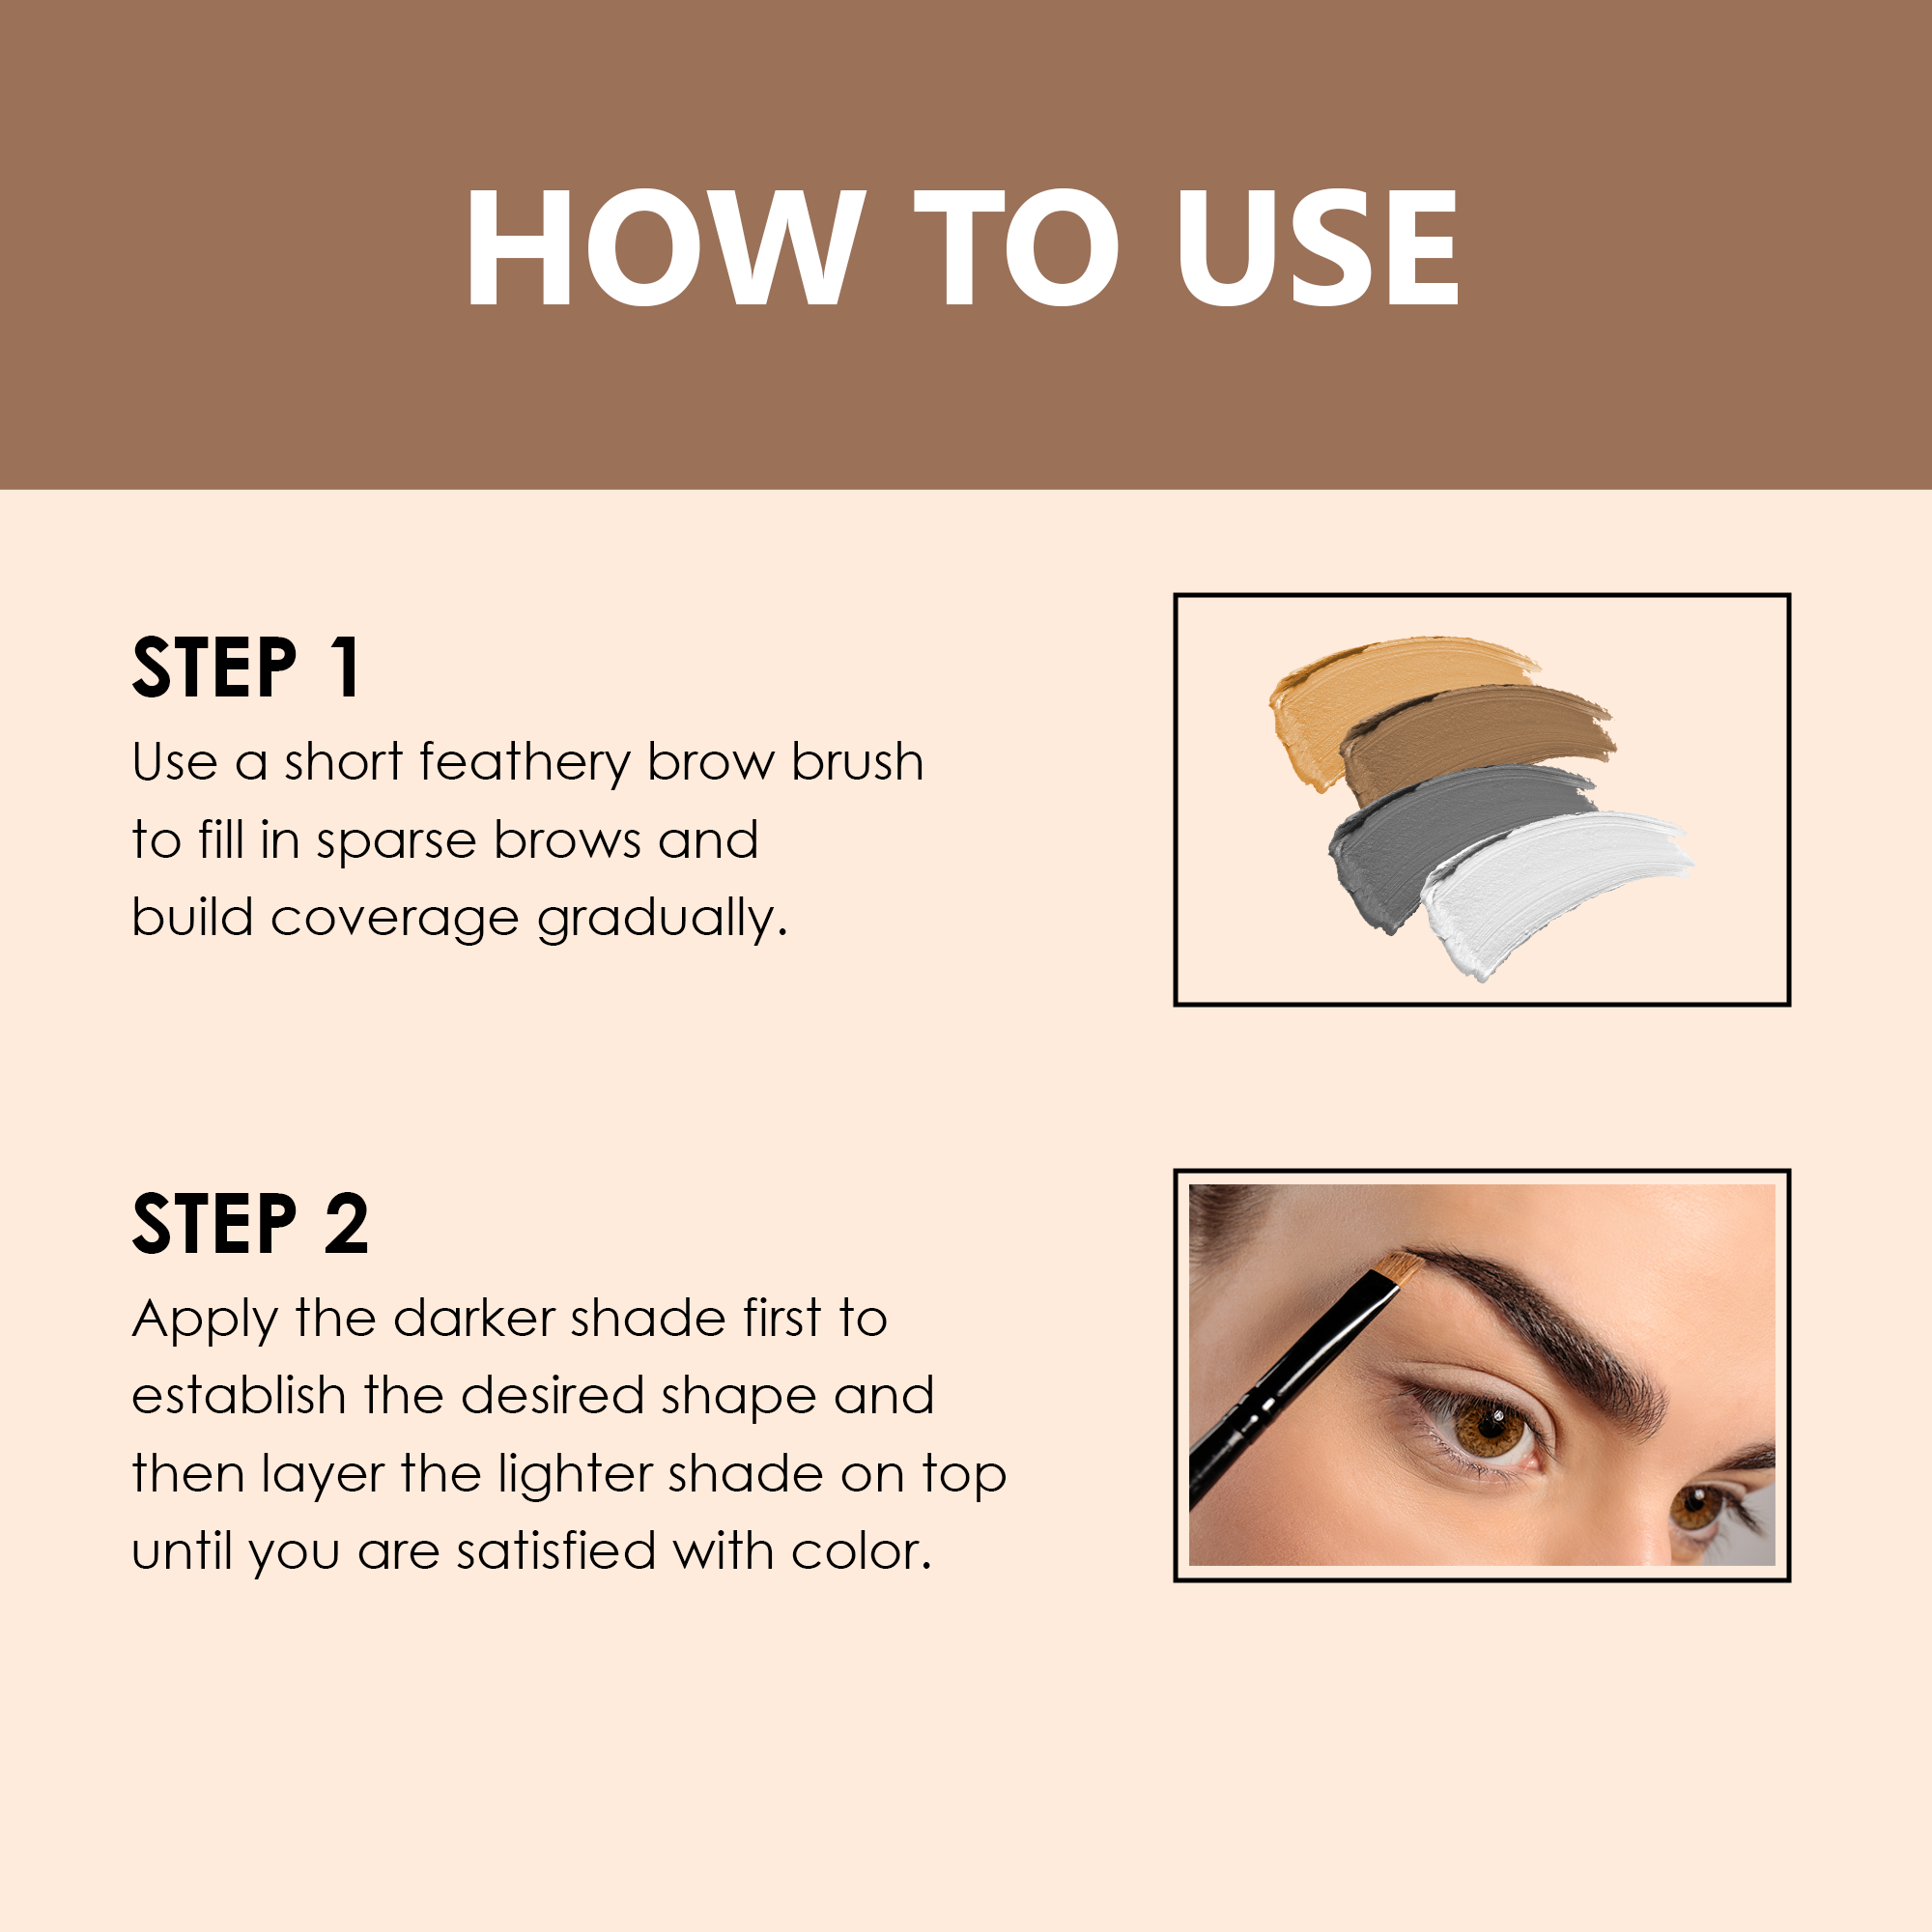 Get Better Ombre Powder Brows Healing Results By Following Simple Steps